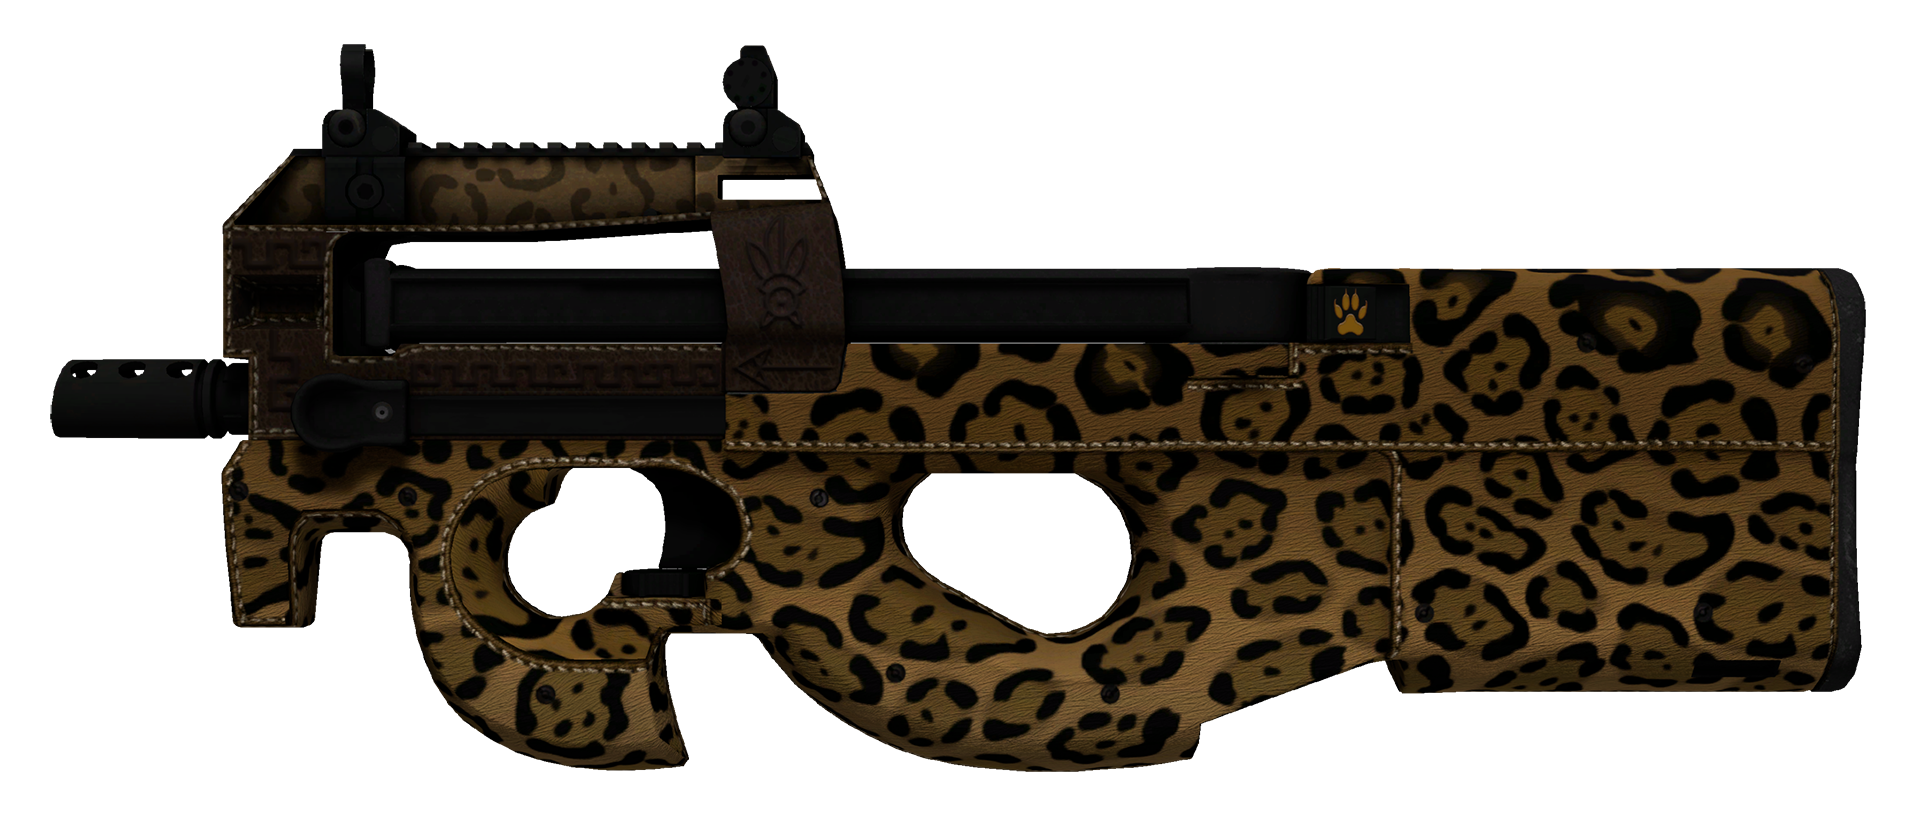 P90 Run and Hide Large Rendering